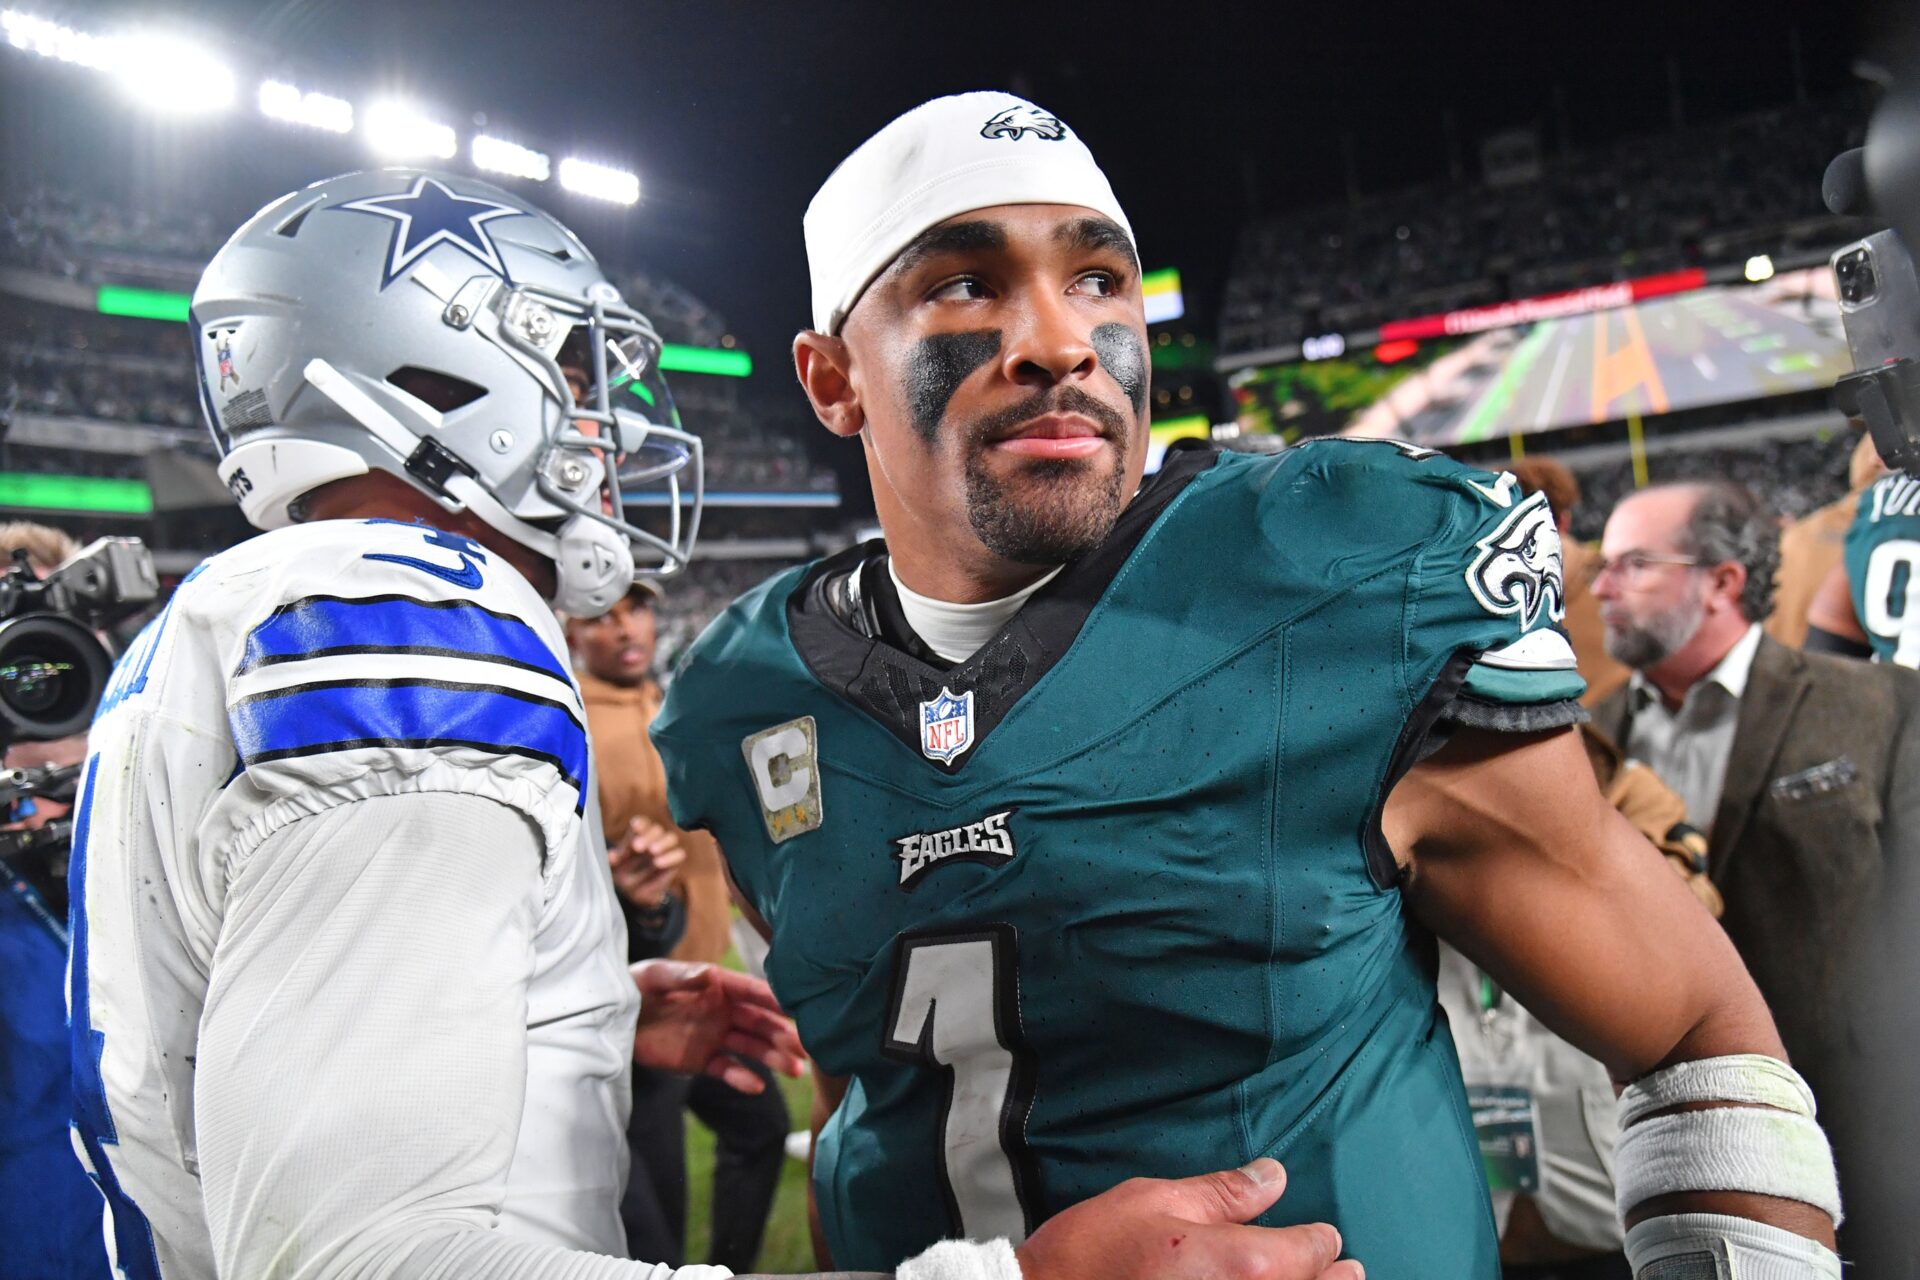 Quarterbacks Dak Prescott (left) and Jalen Hurts (right) meet on the field after the Philadelphia Eagles' victory over the Dallas Cowboys.